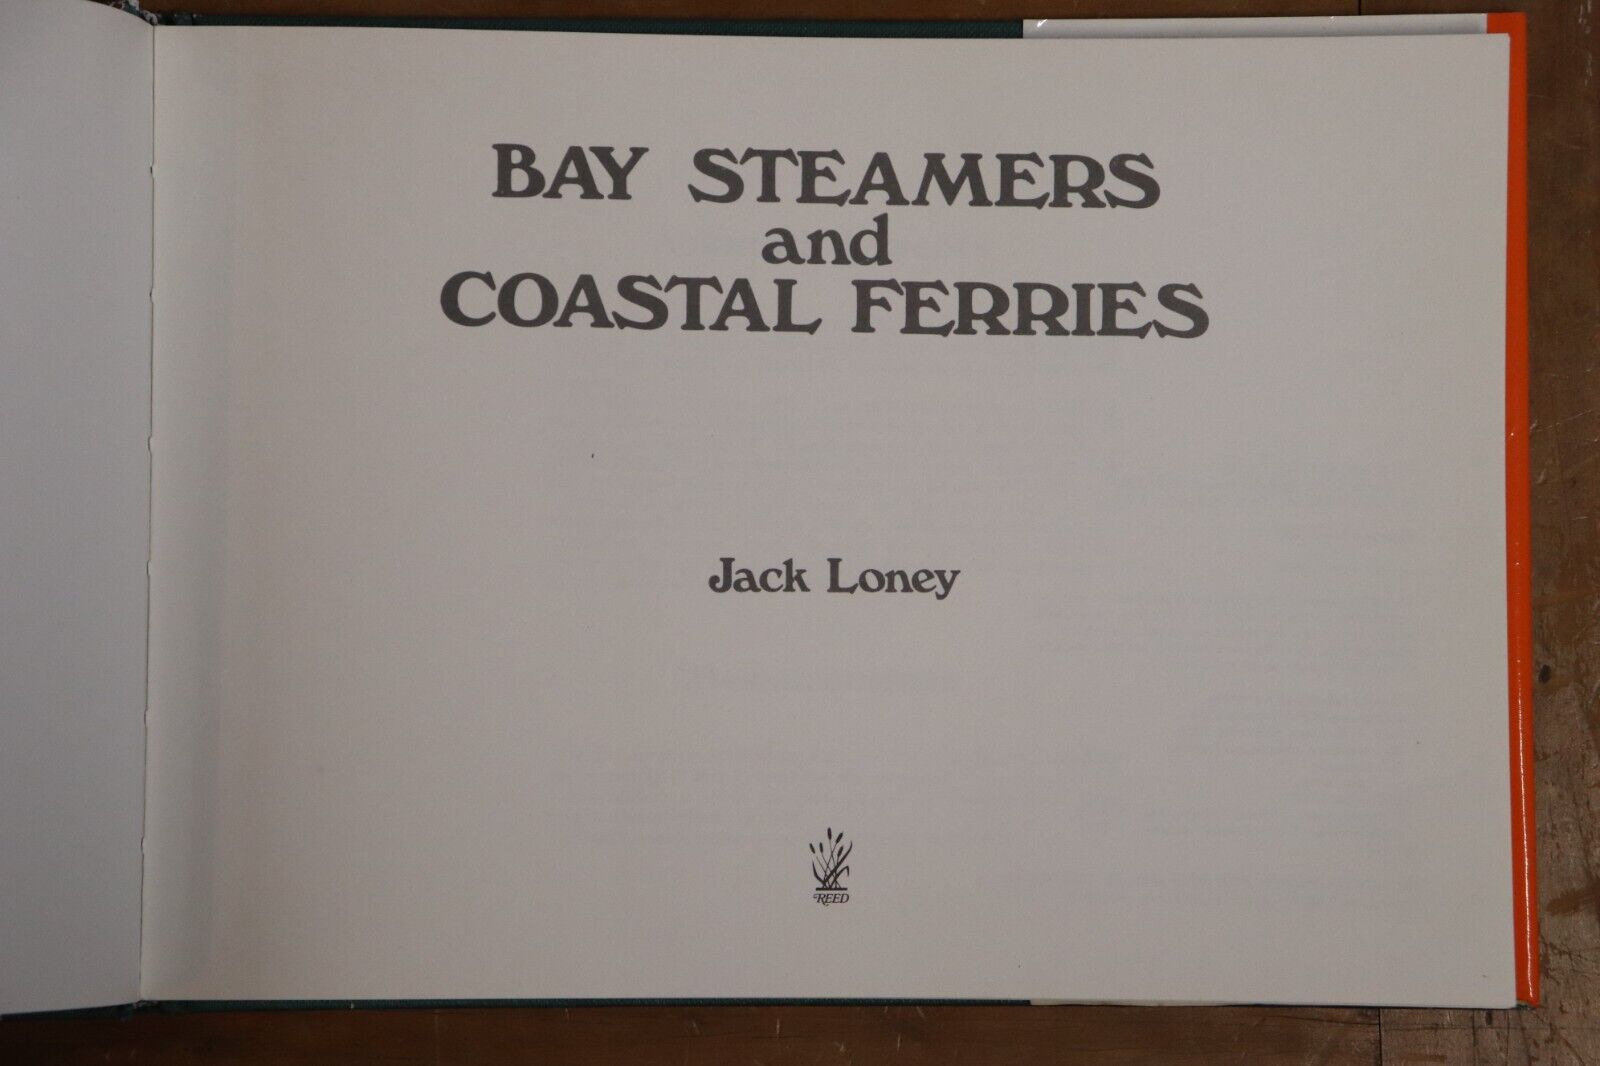 Bay Steamers and Coastal Ferries - 1982 - Melbourne, Australia History Book - 0